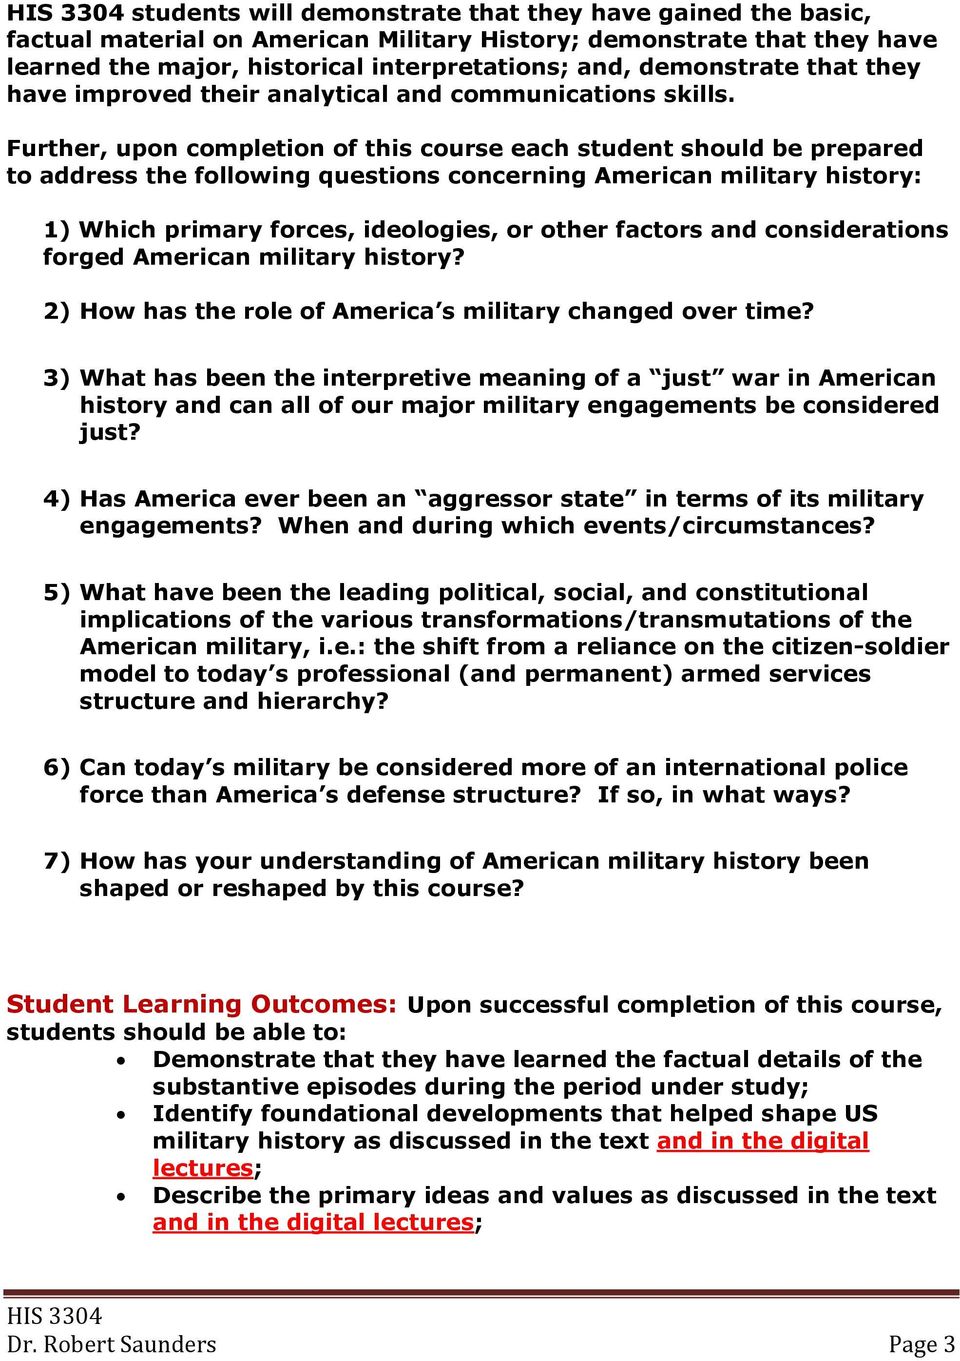 Further, upon completion of this course each student should be prepared to address the following questions concerning American military history: 1) Which primary forces, ideologies, or other factors